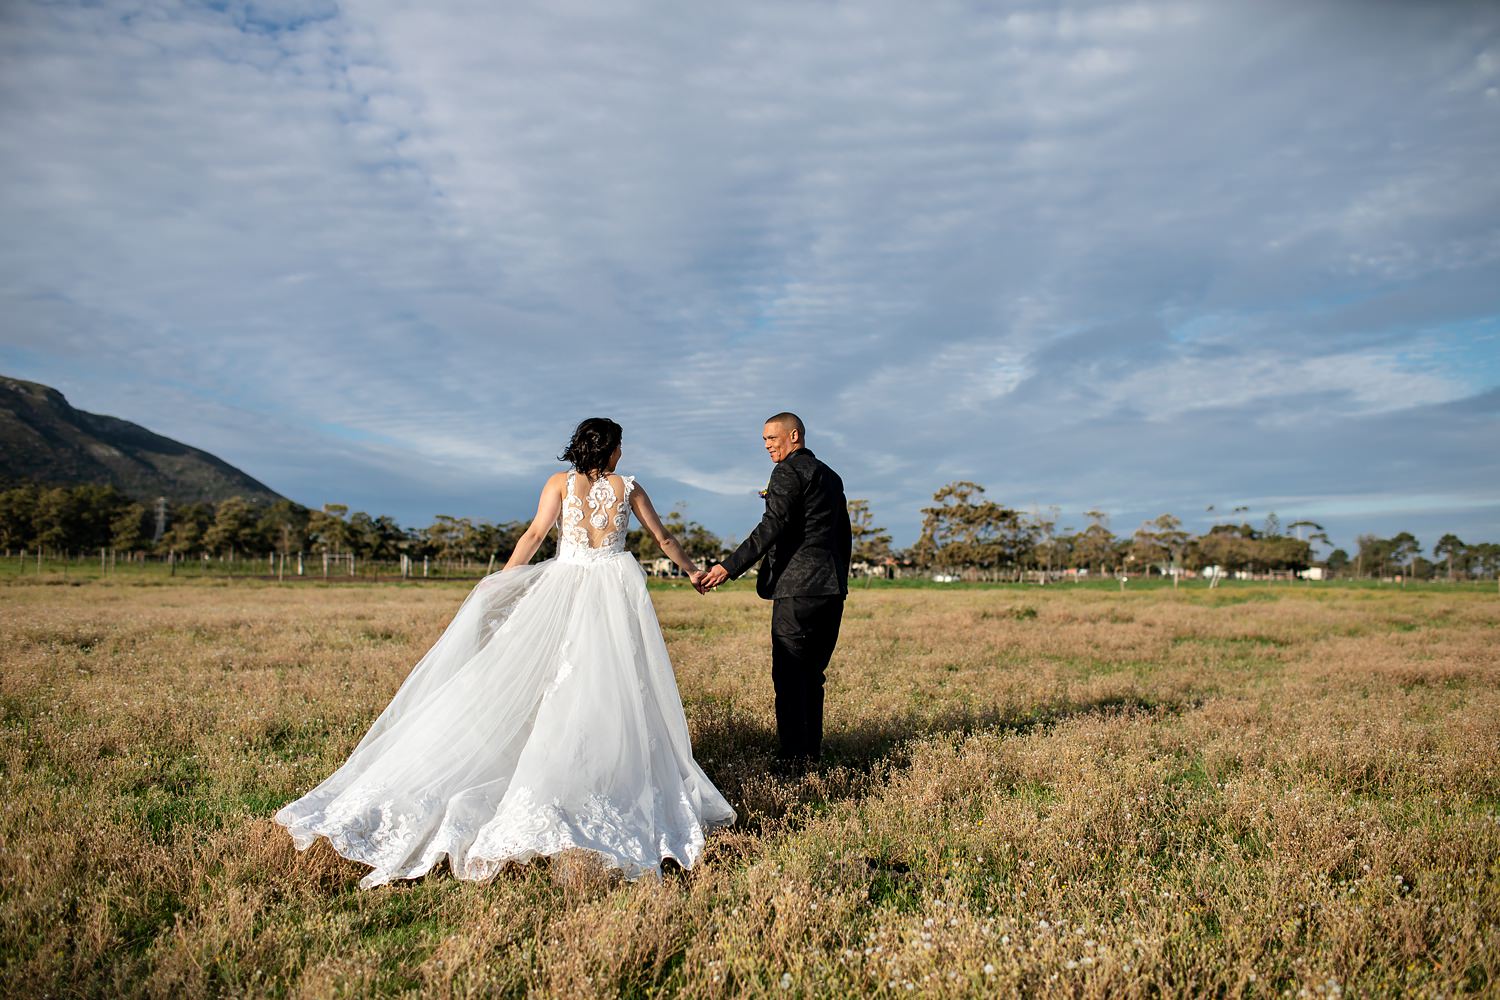 The groom leads the bride into a field, displaying the beautiful train of her wedding dress.